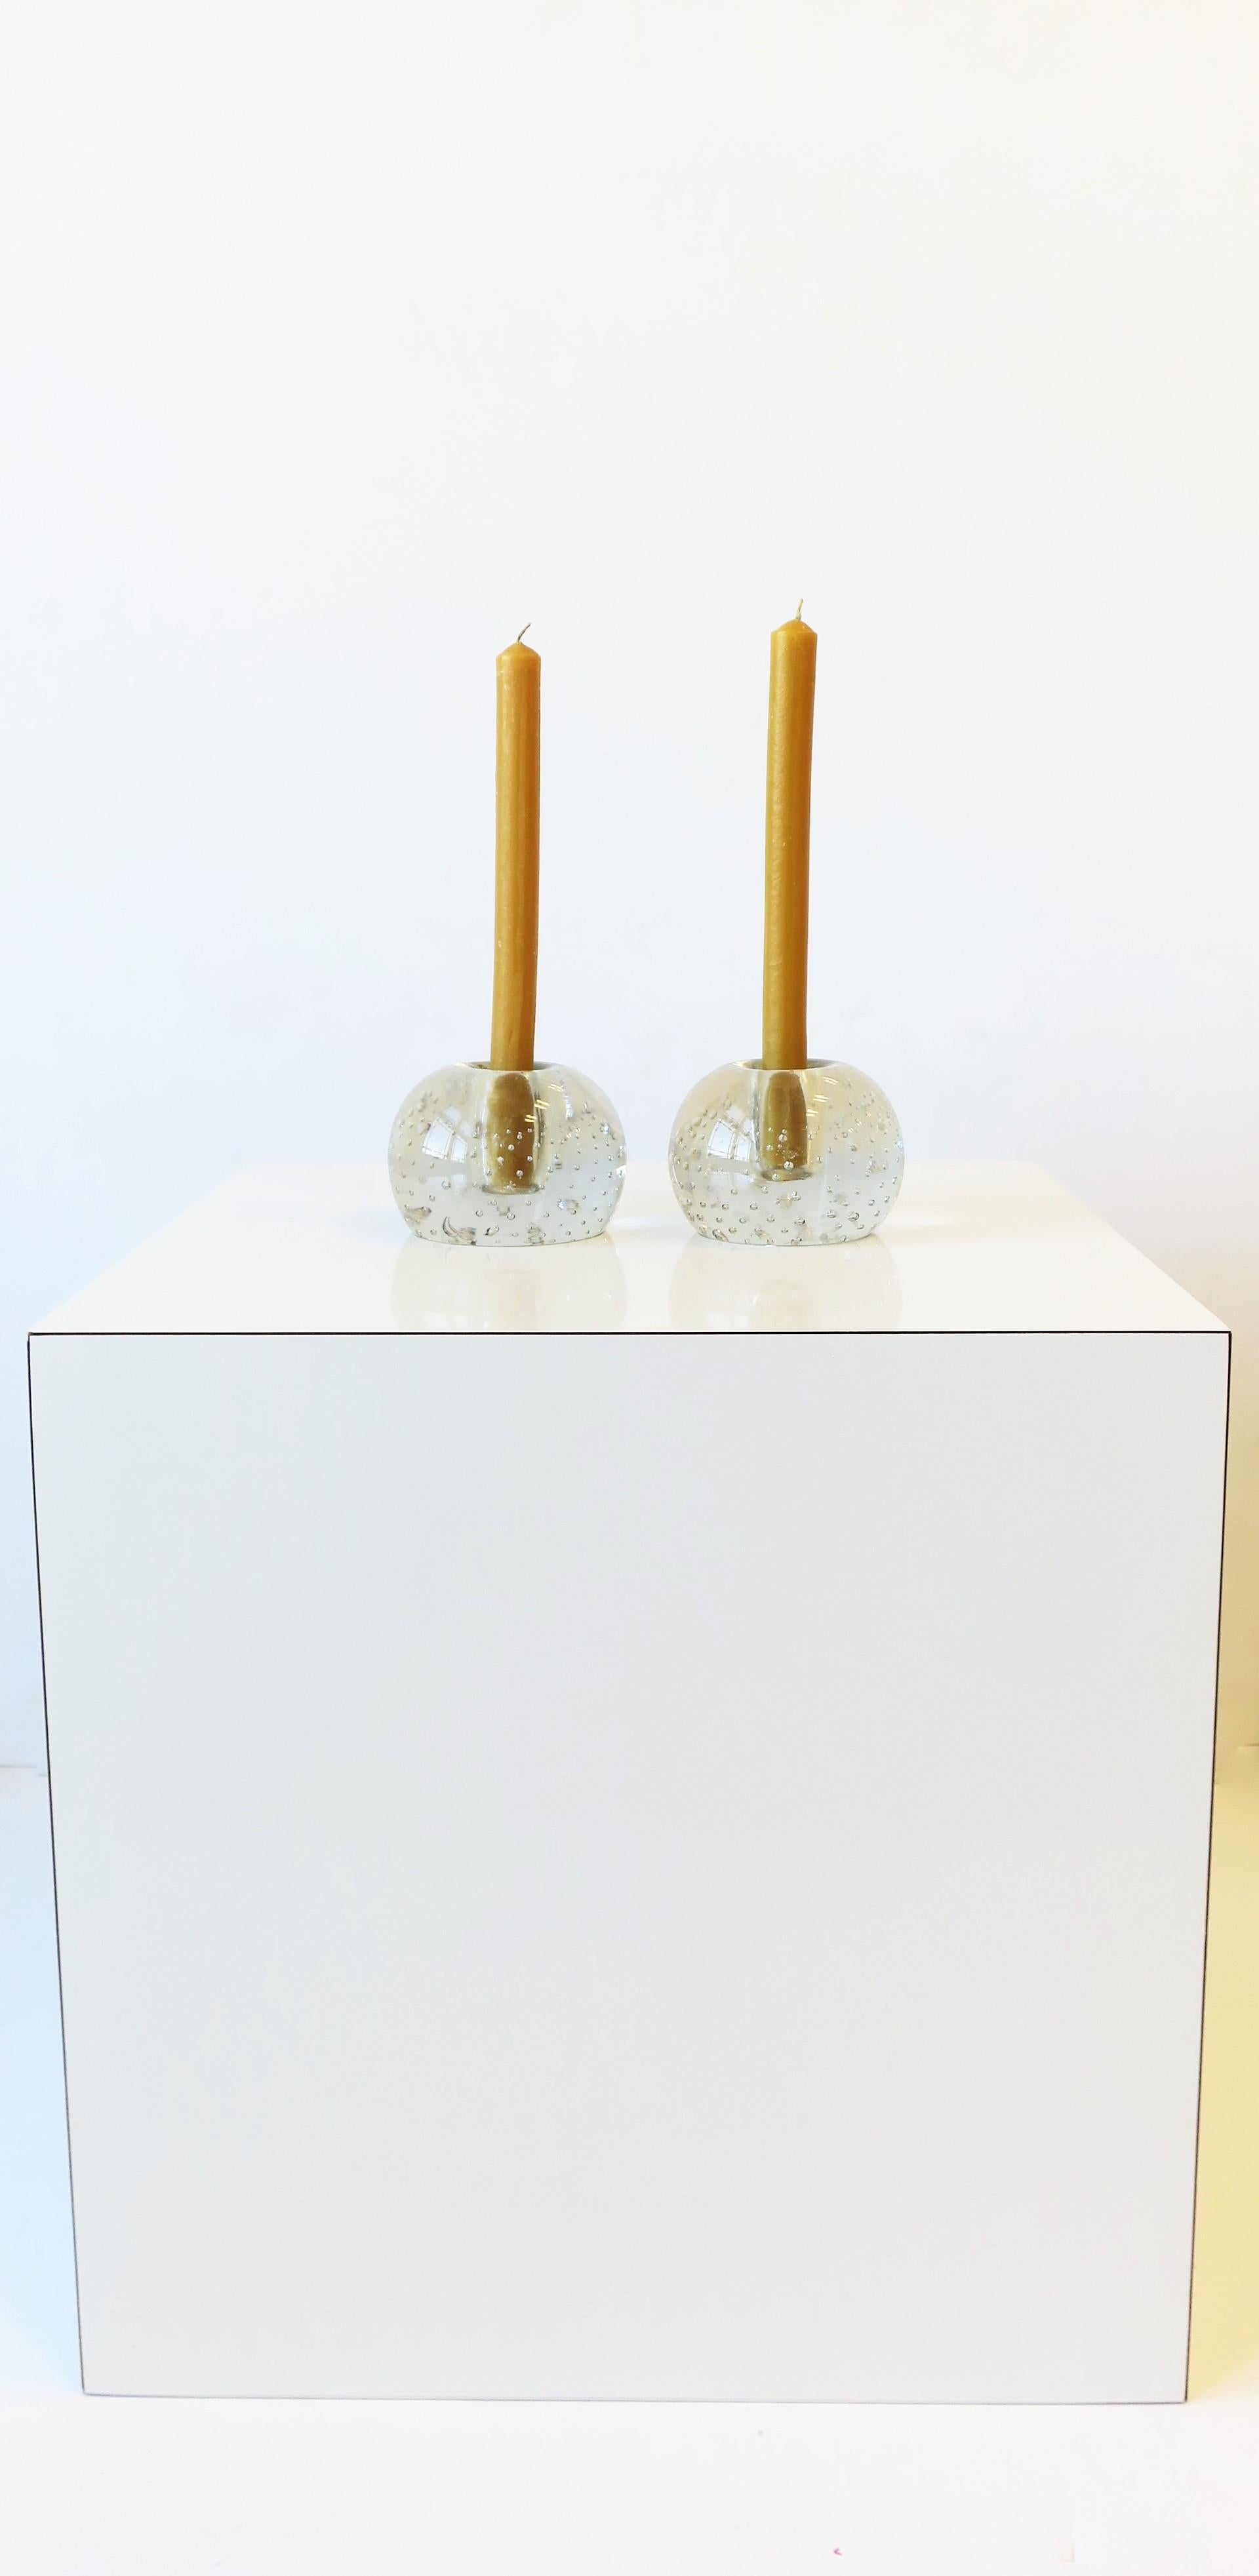 A beautiful and substantial pair of Scandinavian Modern art glass candlestick holders with a controlled bubble design, circa 1960s, Scandinavia. 

White end table shown also available, search 1stDibs ref. #: LU1314222935752
Egyptian Revival